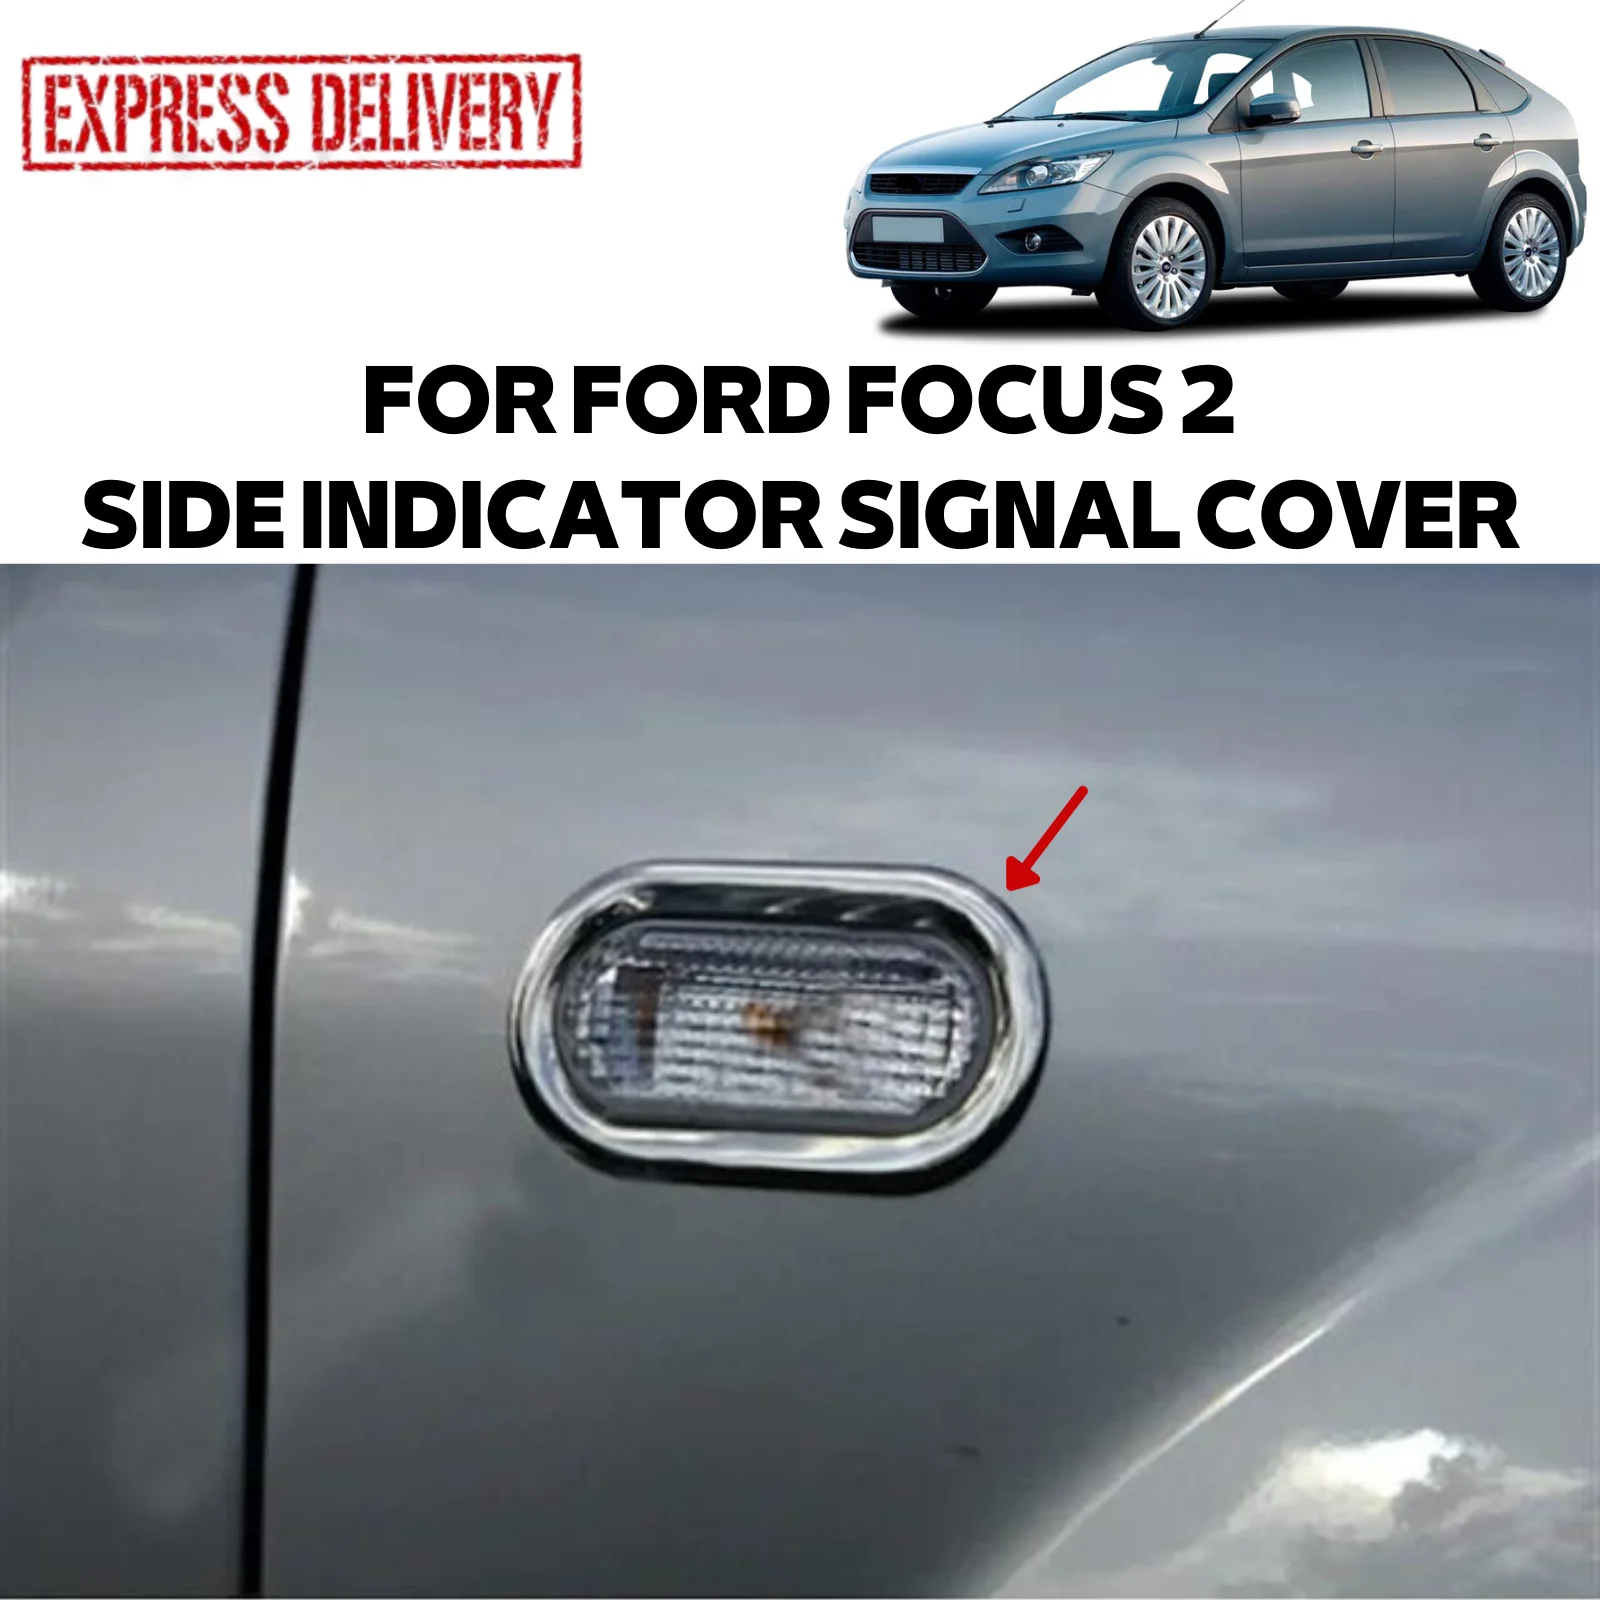 

FOR FORD FOCUS 2 Facelift HB 5D/SD/SW 2005-2011 SİNYAL FRAME 2 PIECE CHROME STAINLESS STEEL HEADLIGHT LIGHT ACCESSORIES